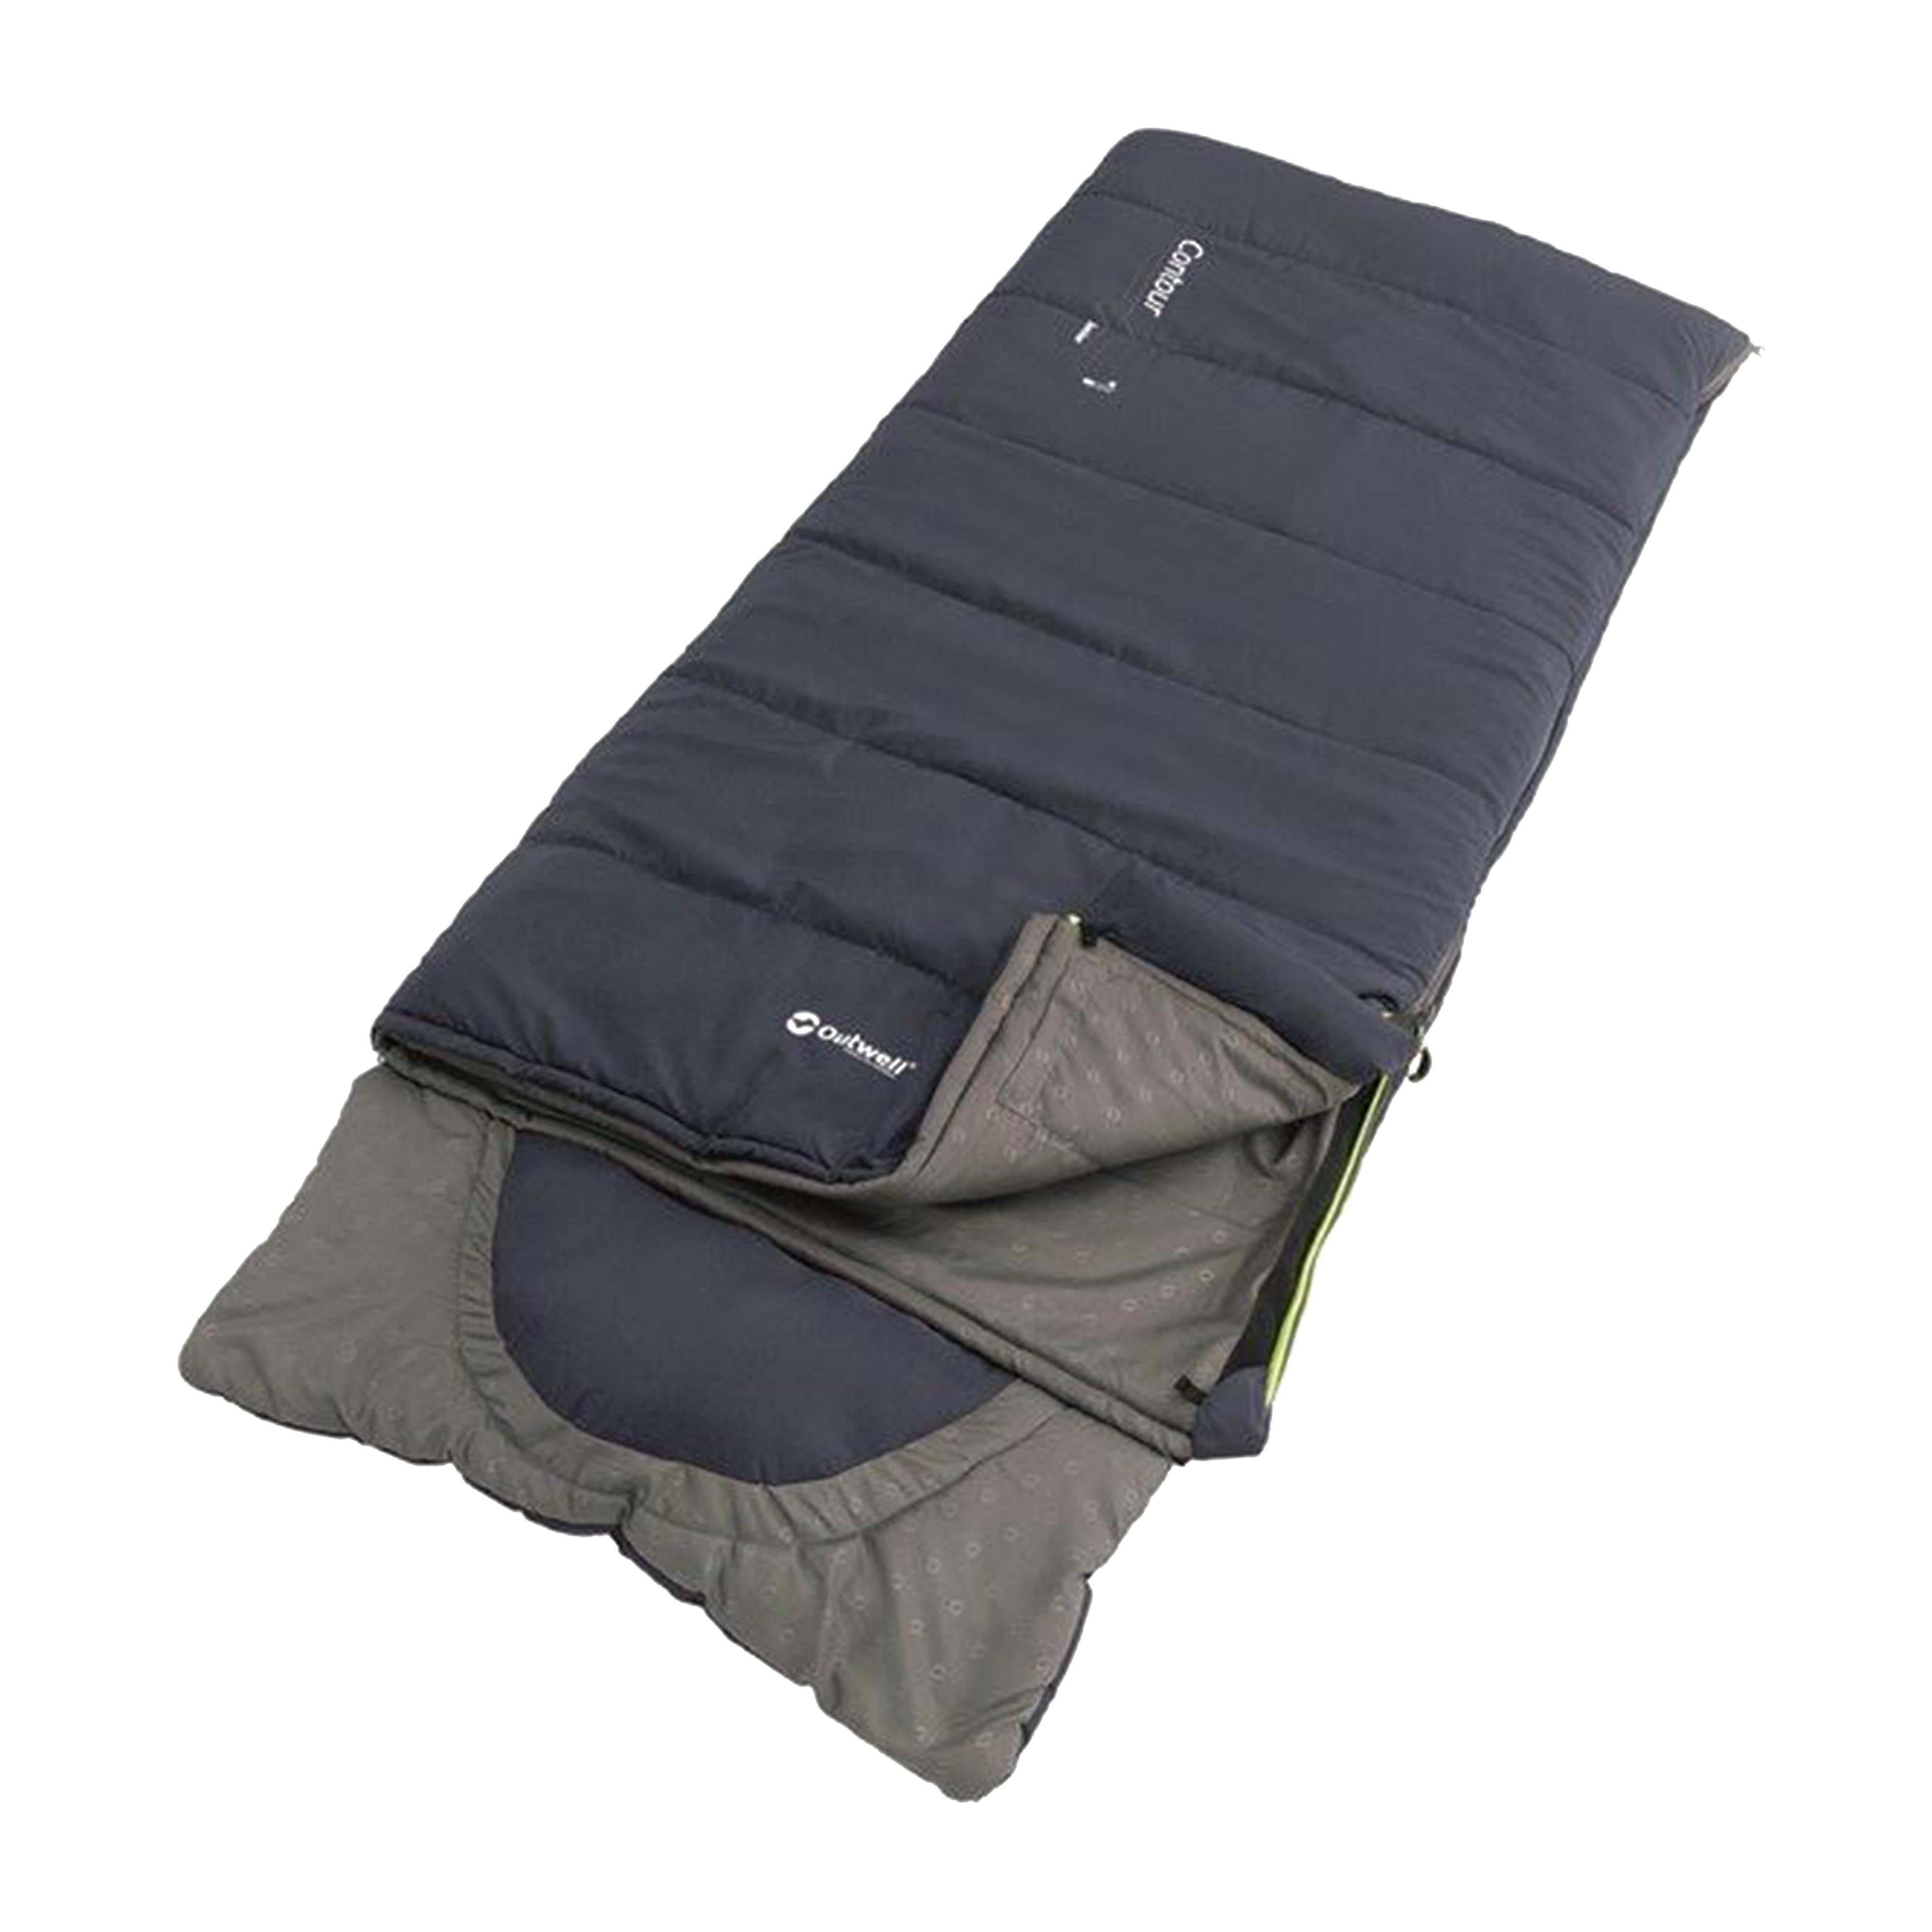  Outwell Contour Lux Junior Sleeping Bag, Grey